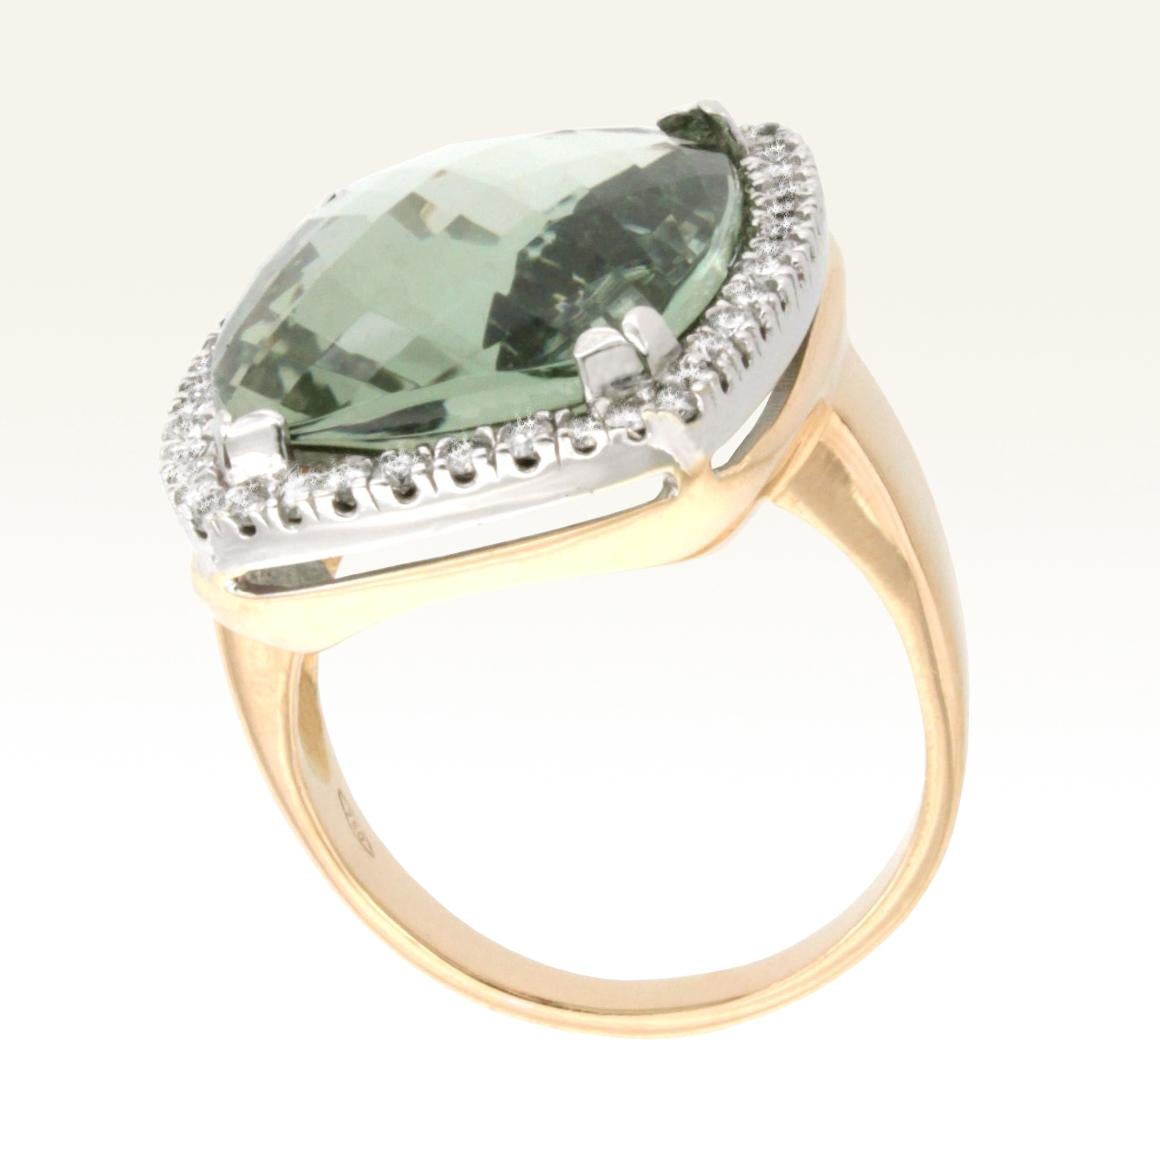 Ring in rose and white gold 18 Karat with Prasiolite Briolè  cut (size stone: mm16 x 21  mm) and white Diamond ct  0.55 VS colour G/H.
This ring is part of the collection 